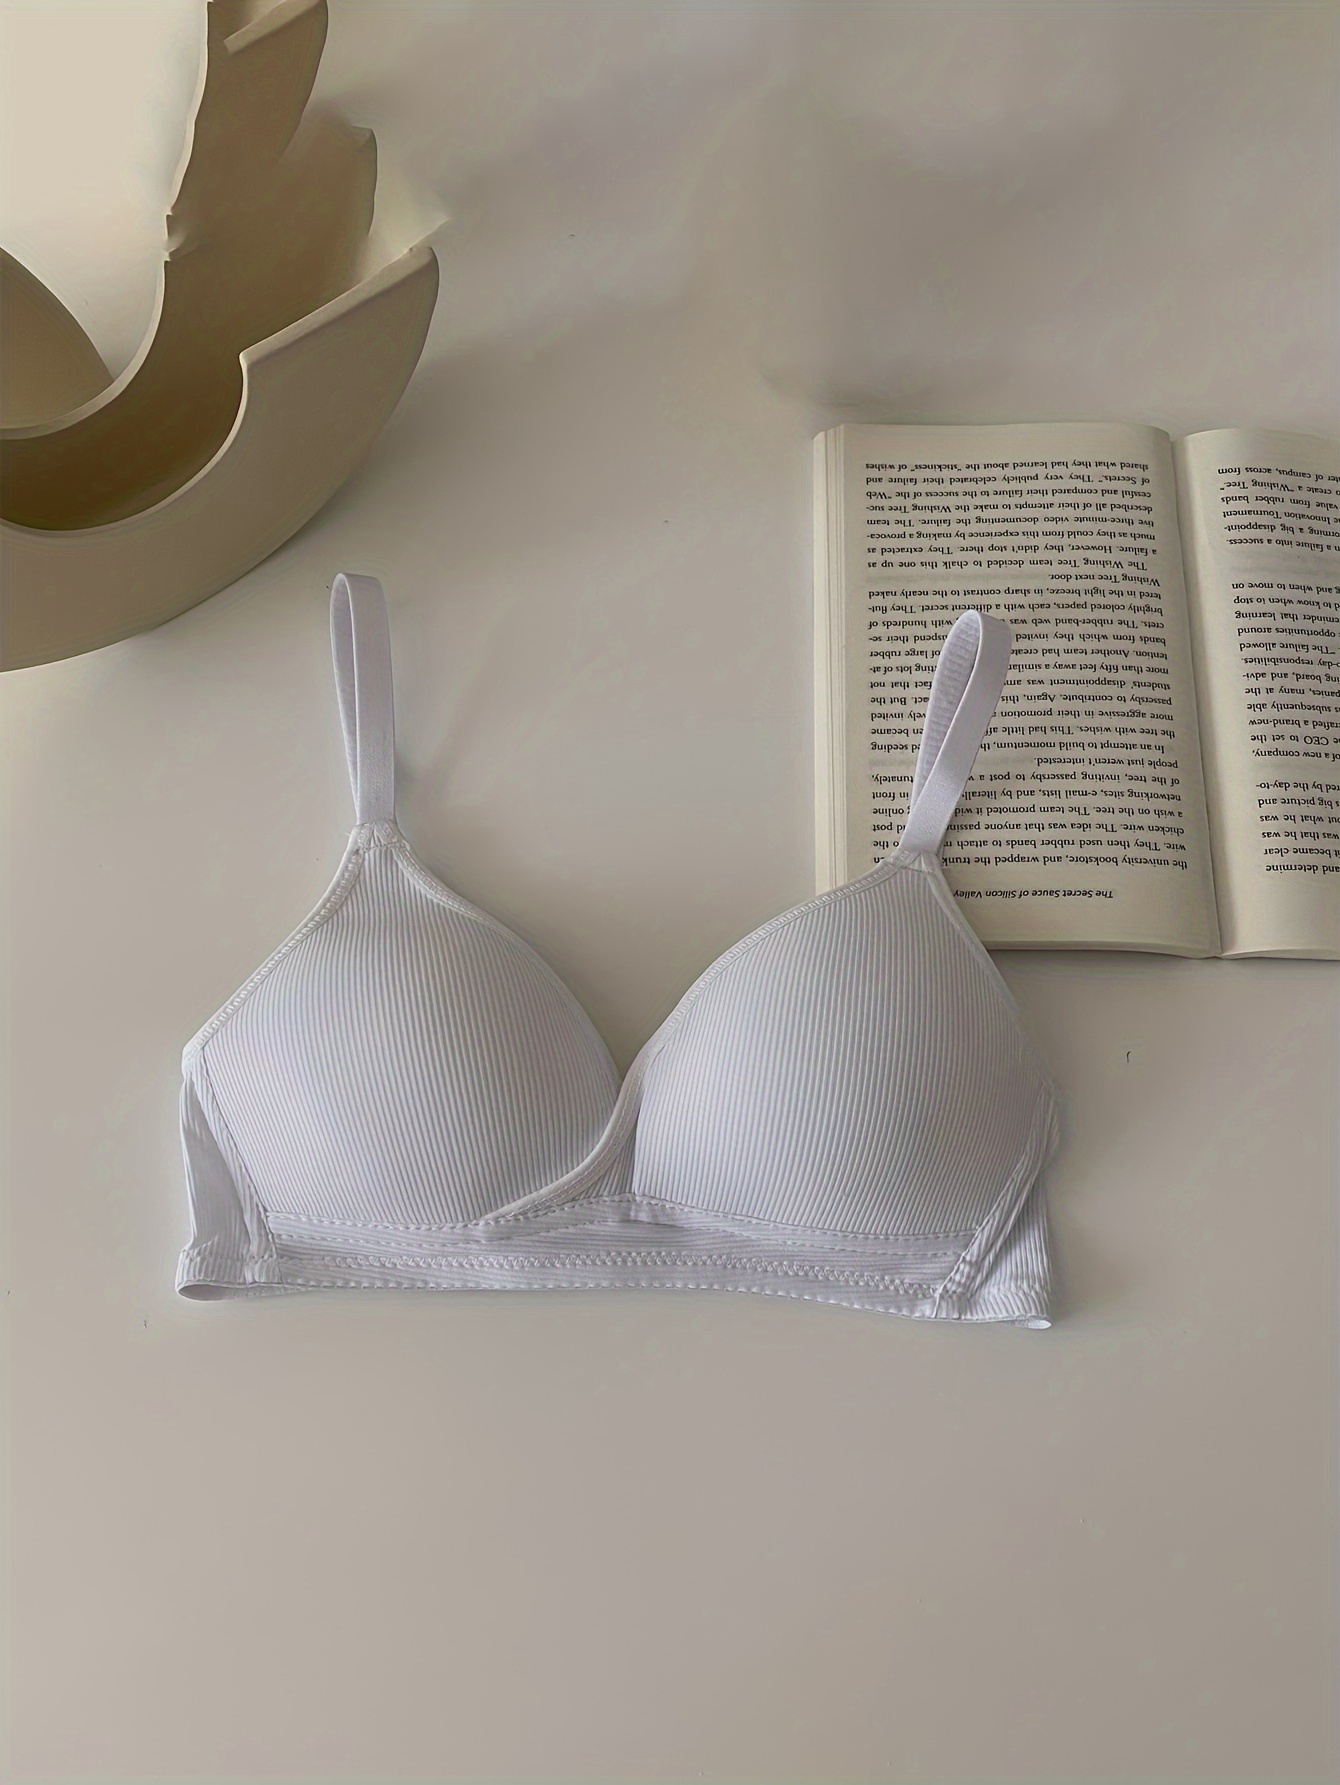 How To Choose Bra For A Teenager - Everything To Consider